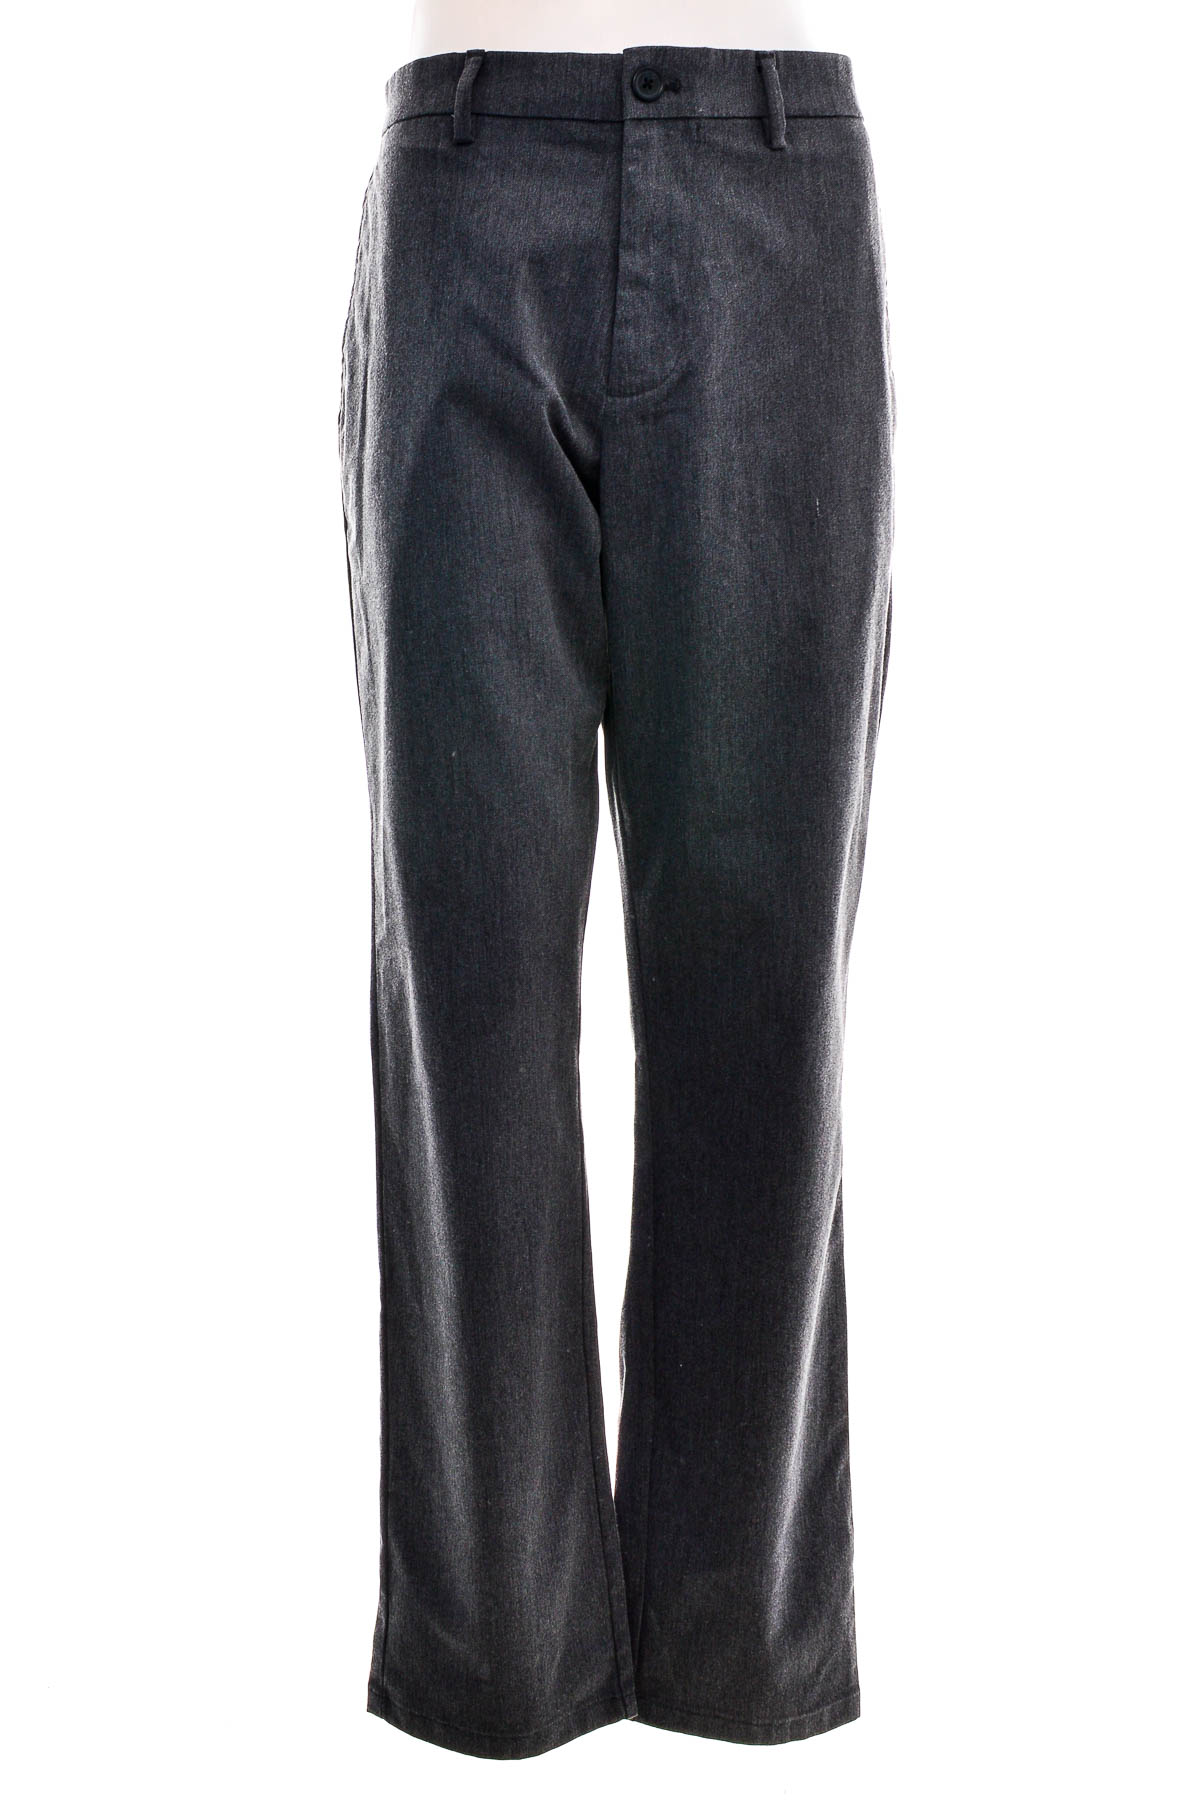 Men's trousers - OLD NAVY - 0